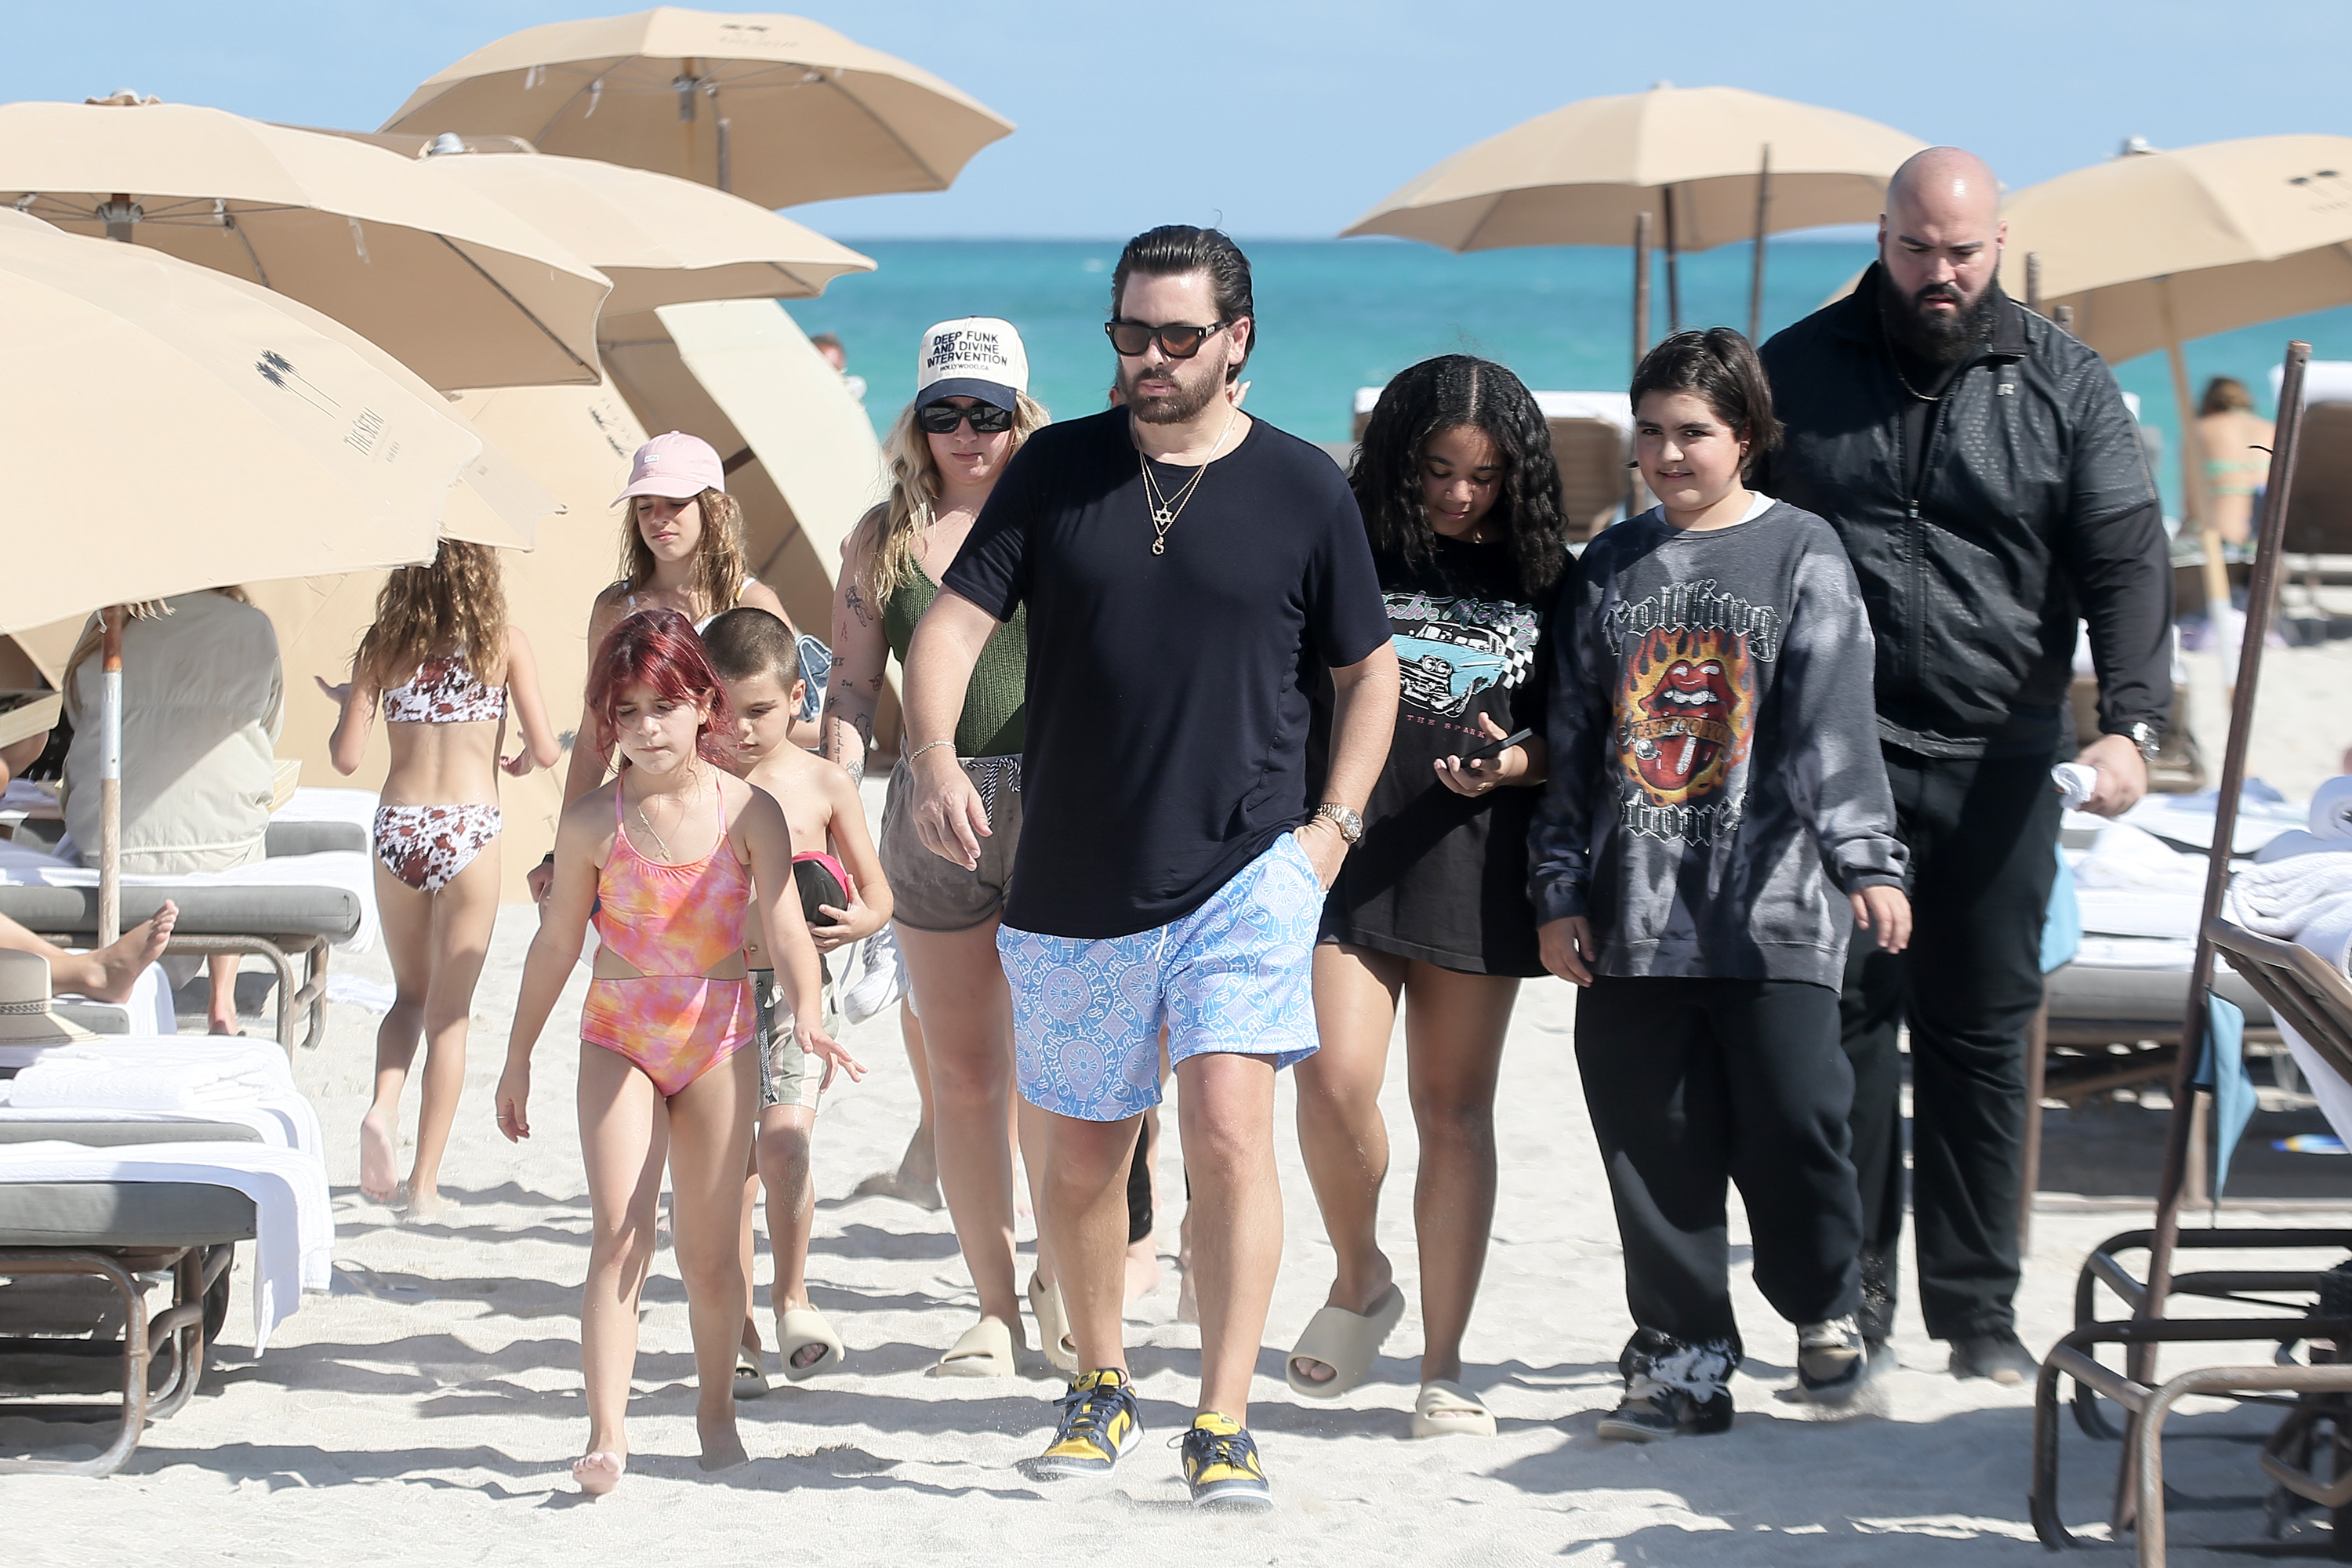 Scott seemed to have gained weight while out with his children on the beach in February 2022